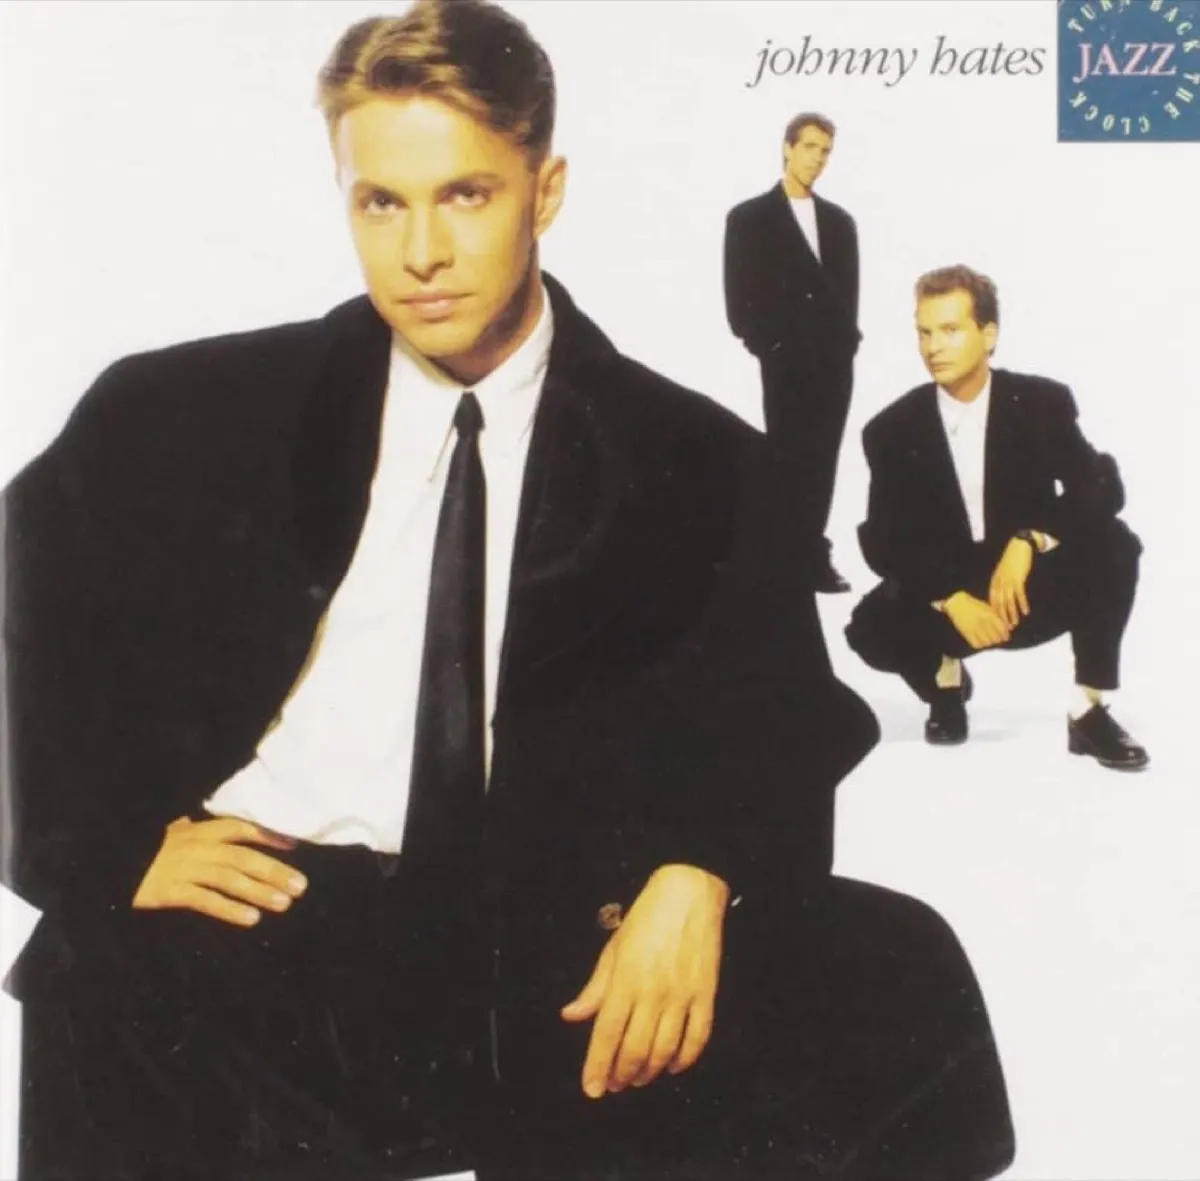 turn back the block by johnny hates jazz album cover